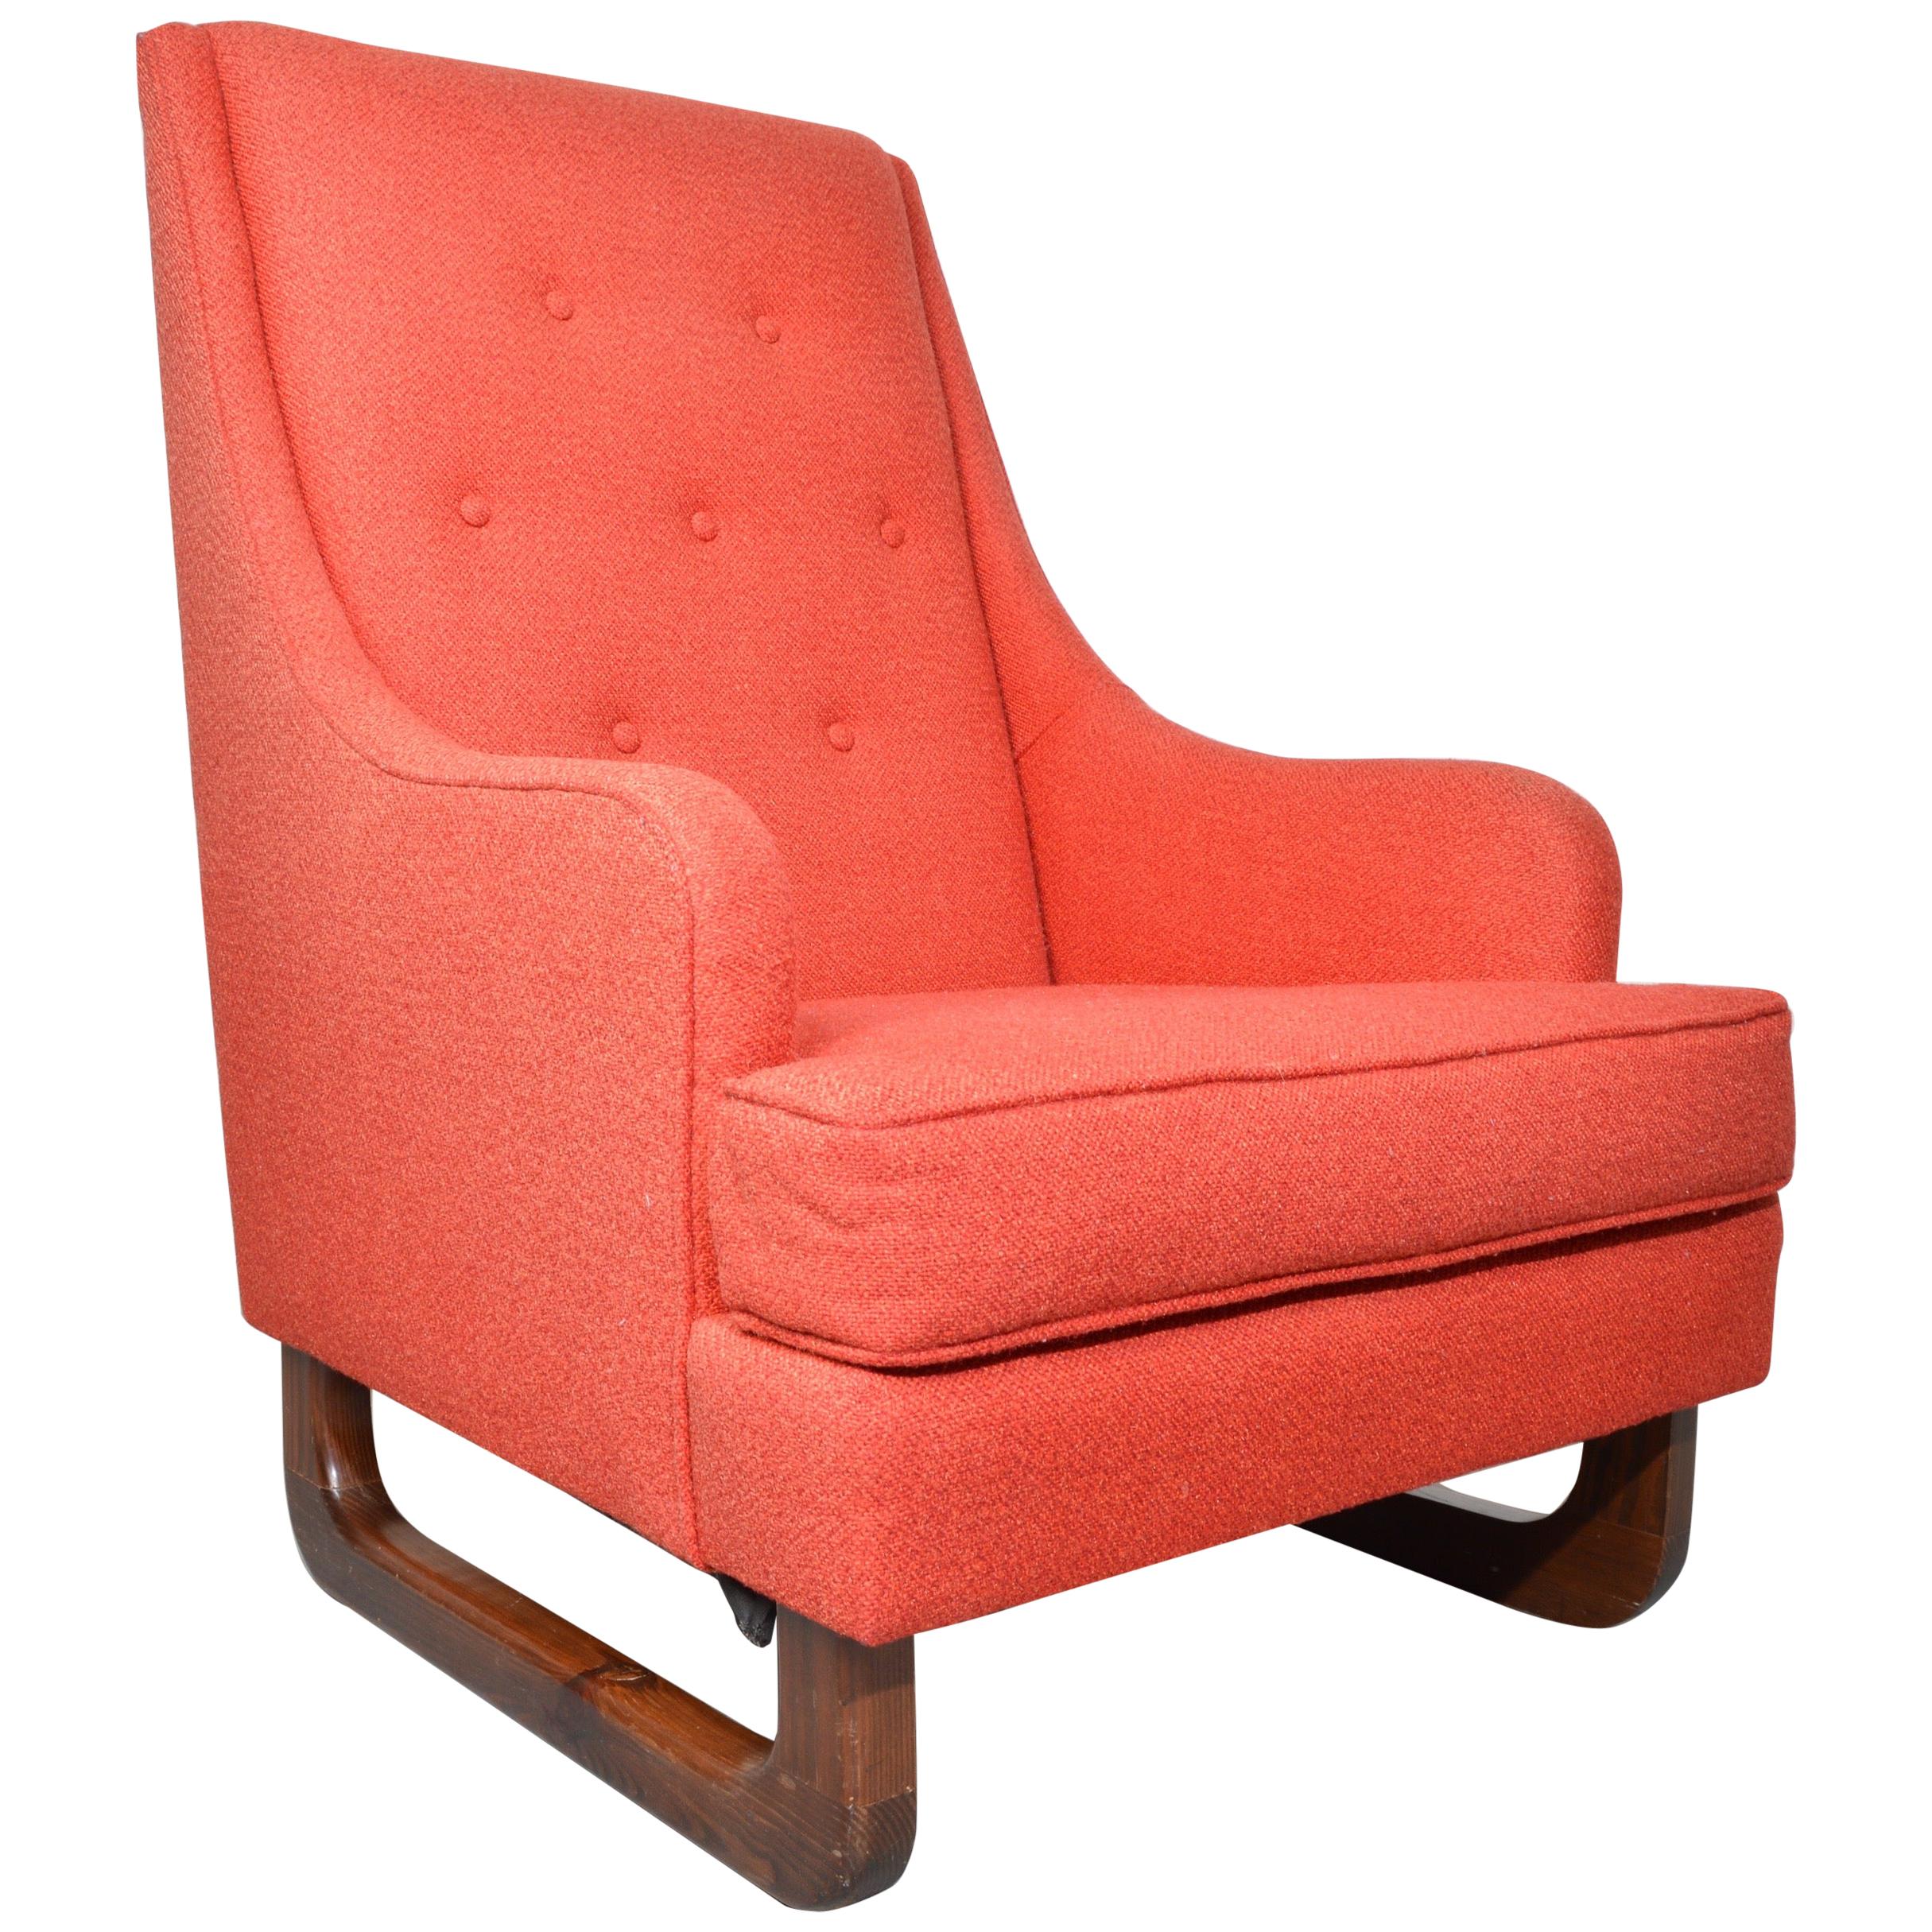 Midcentury High Back Lounge Chair Attributed to Adrian Pearsall